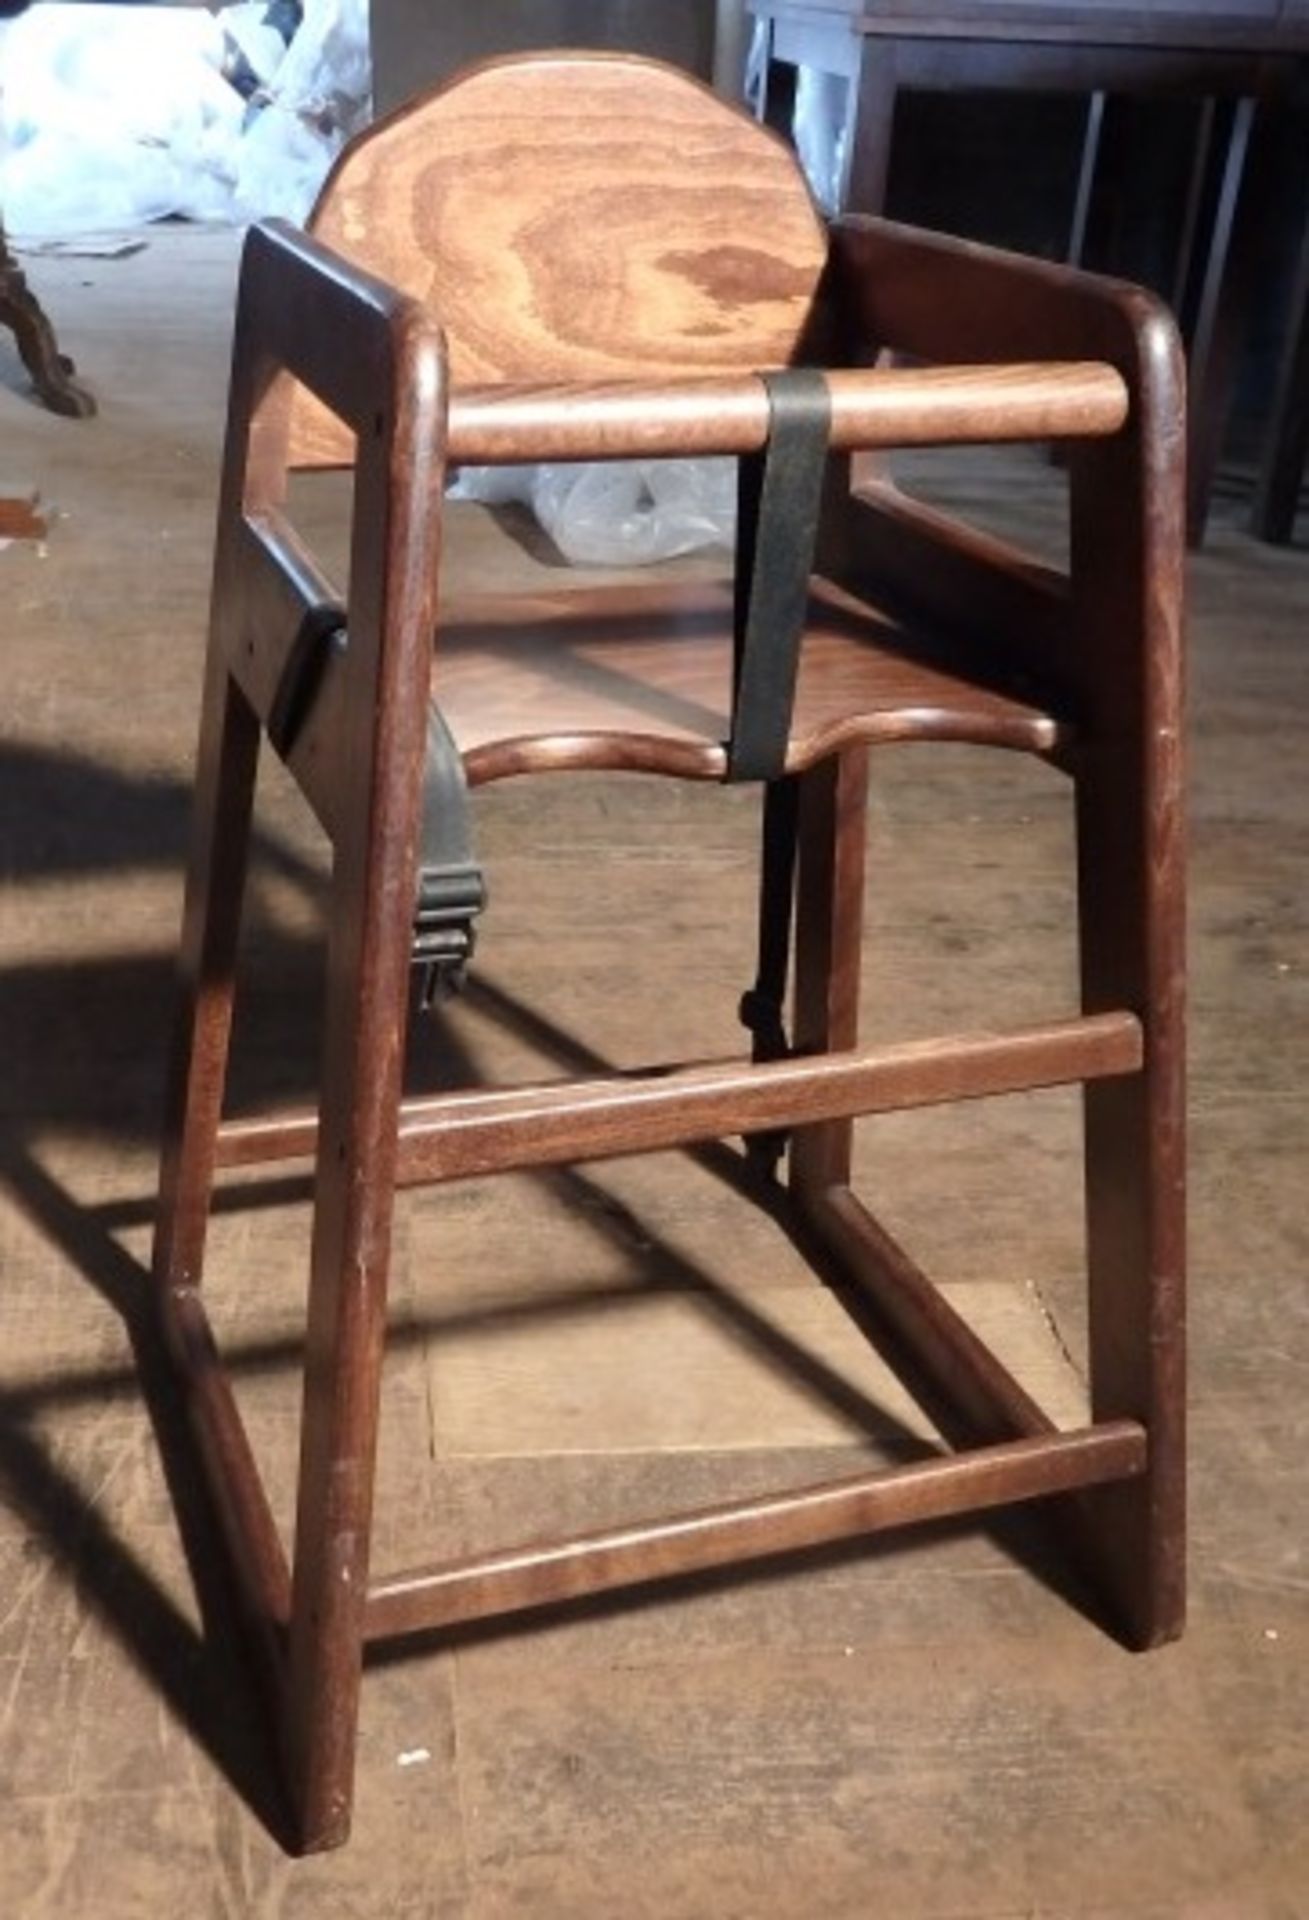 1 x Solid Wood Childs High Chair - All Recently Taken From A Bar & Restaurant Environment -